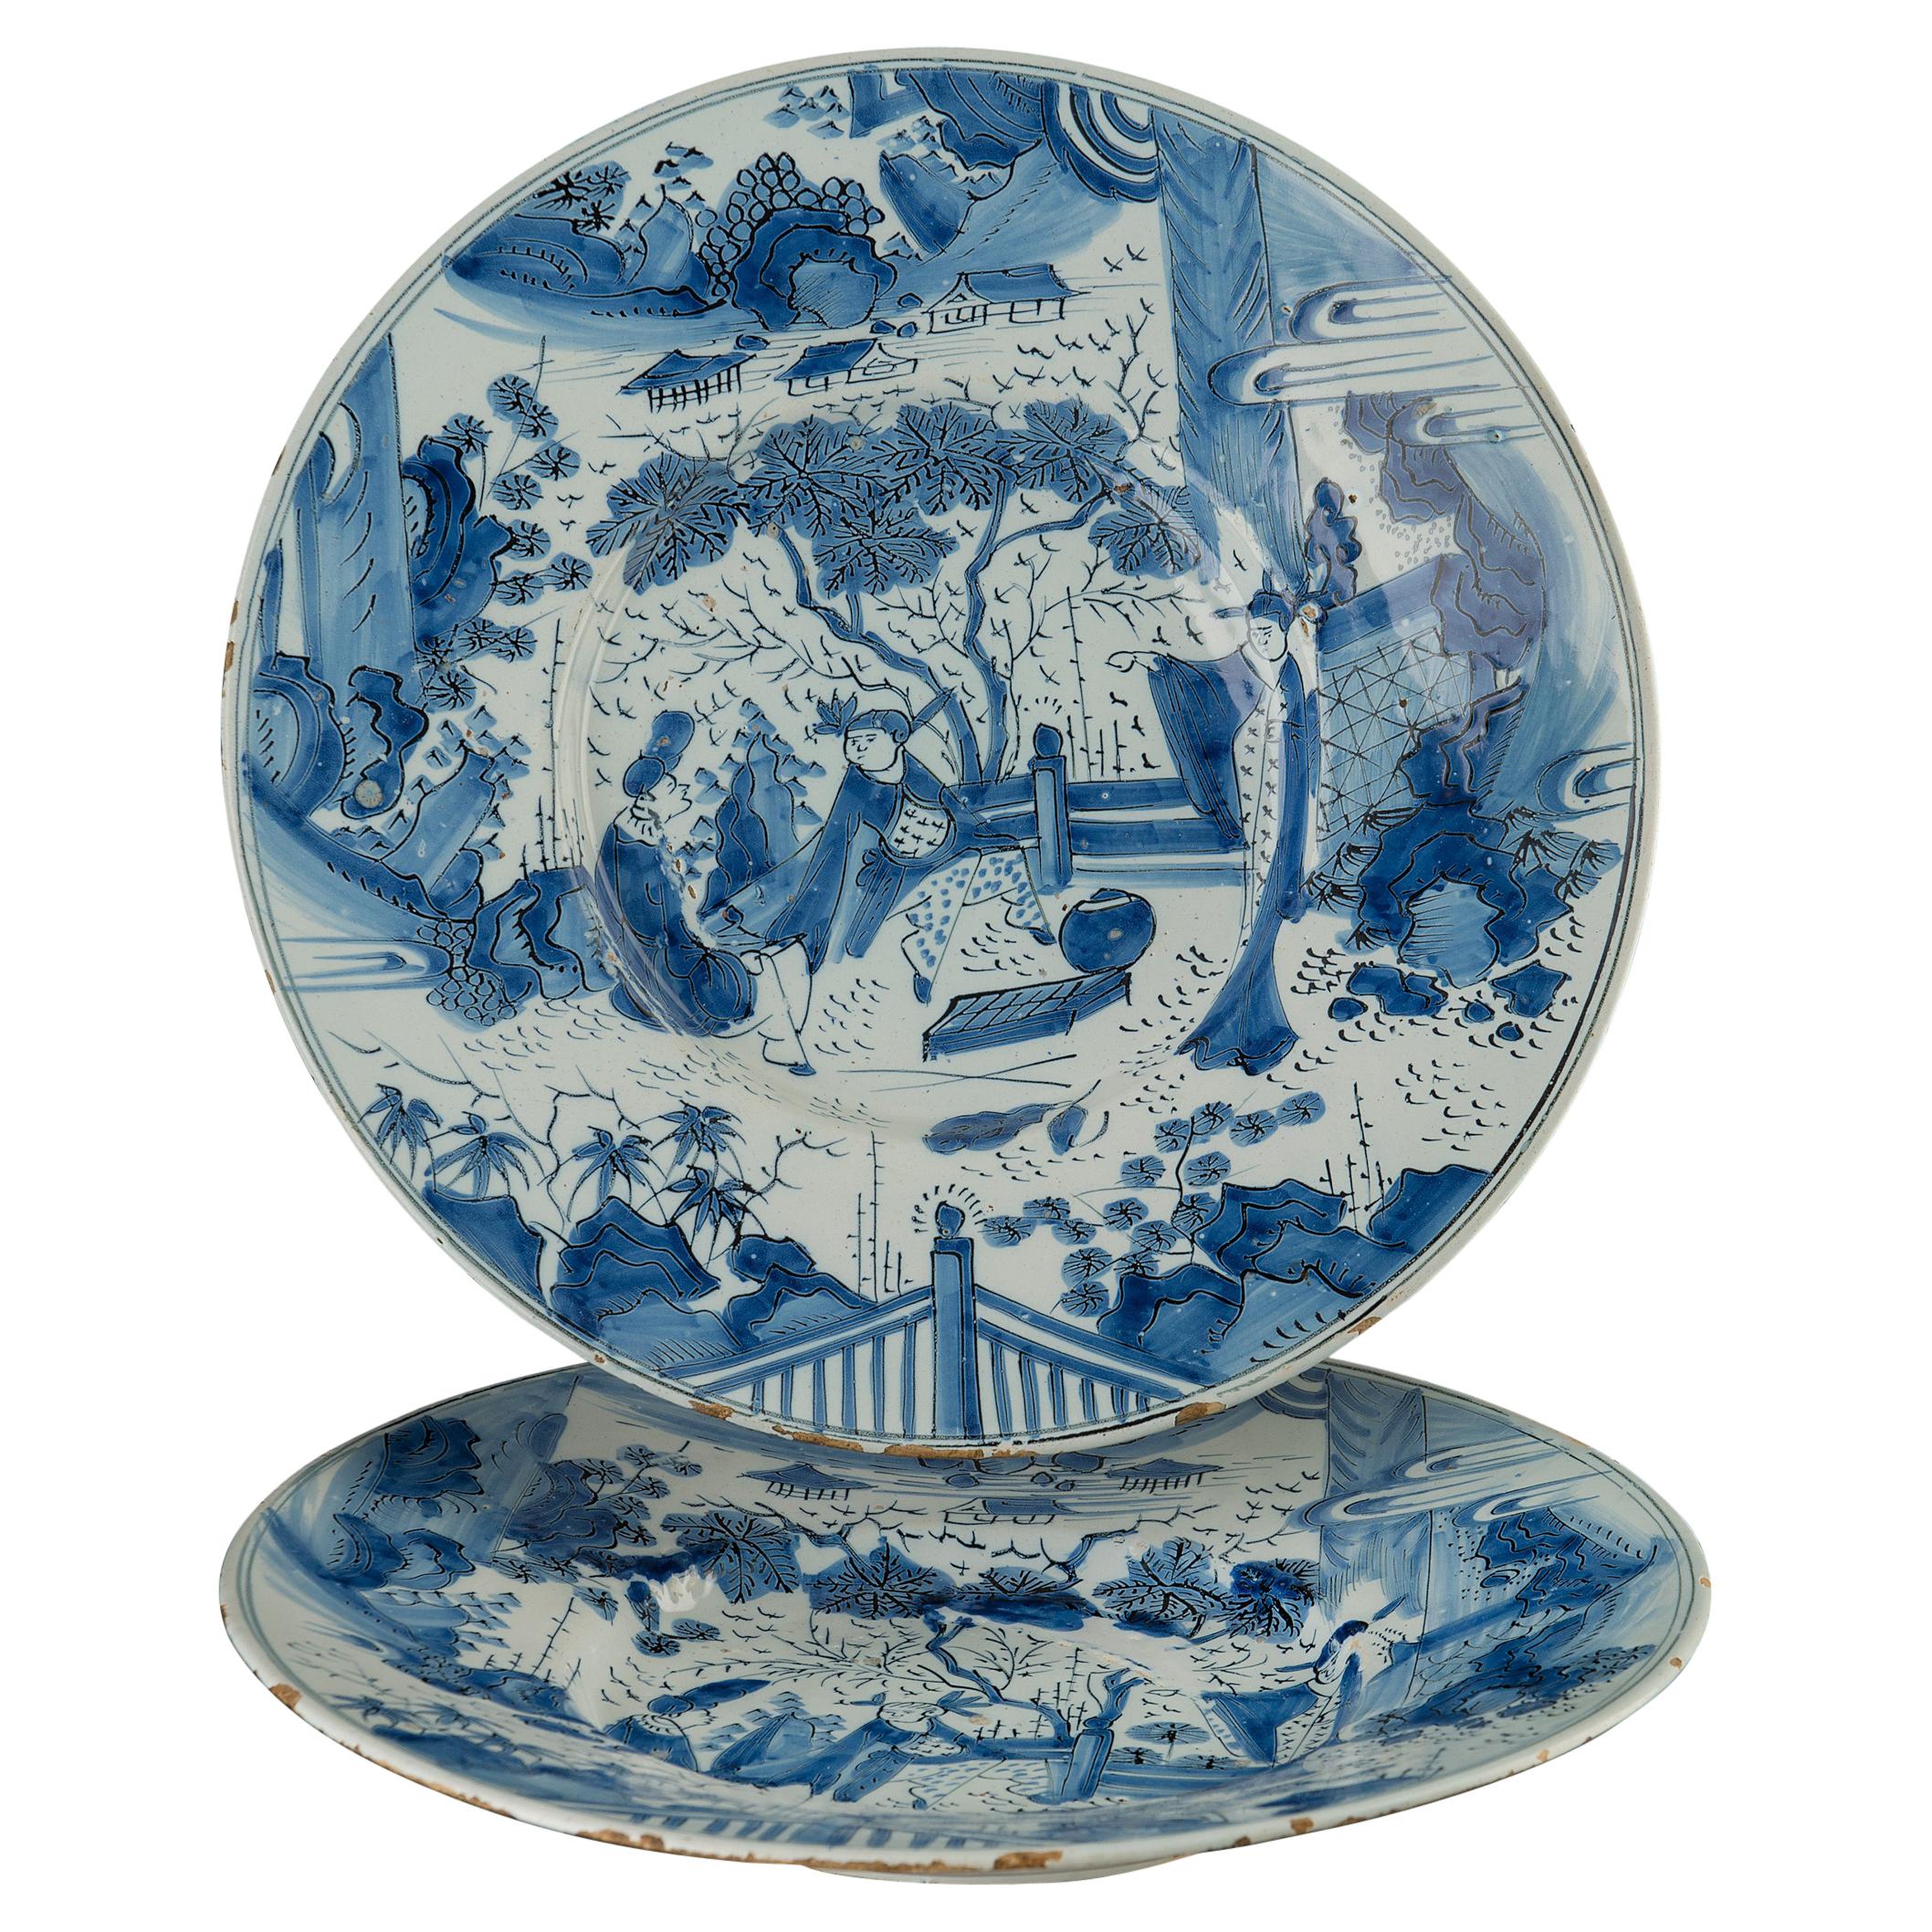 Delft, Pair of Blue and White Chinoiserie Dishes, 1680 - 1700